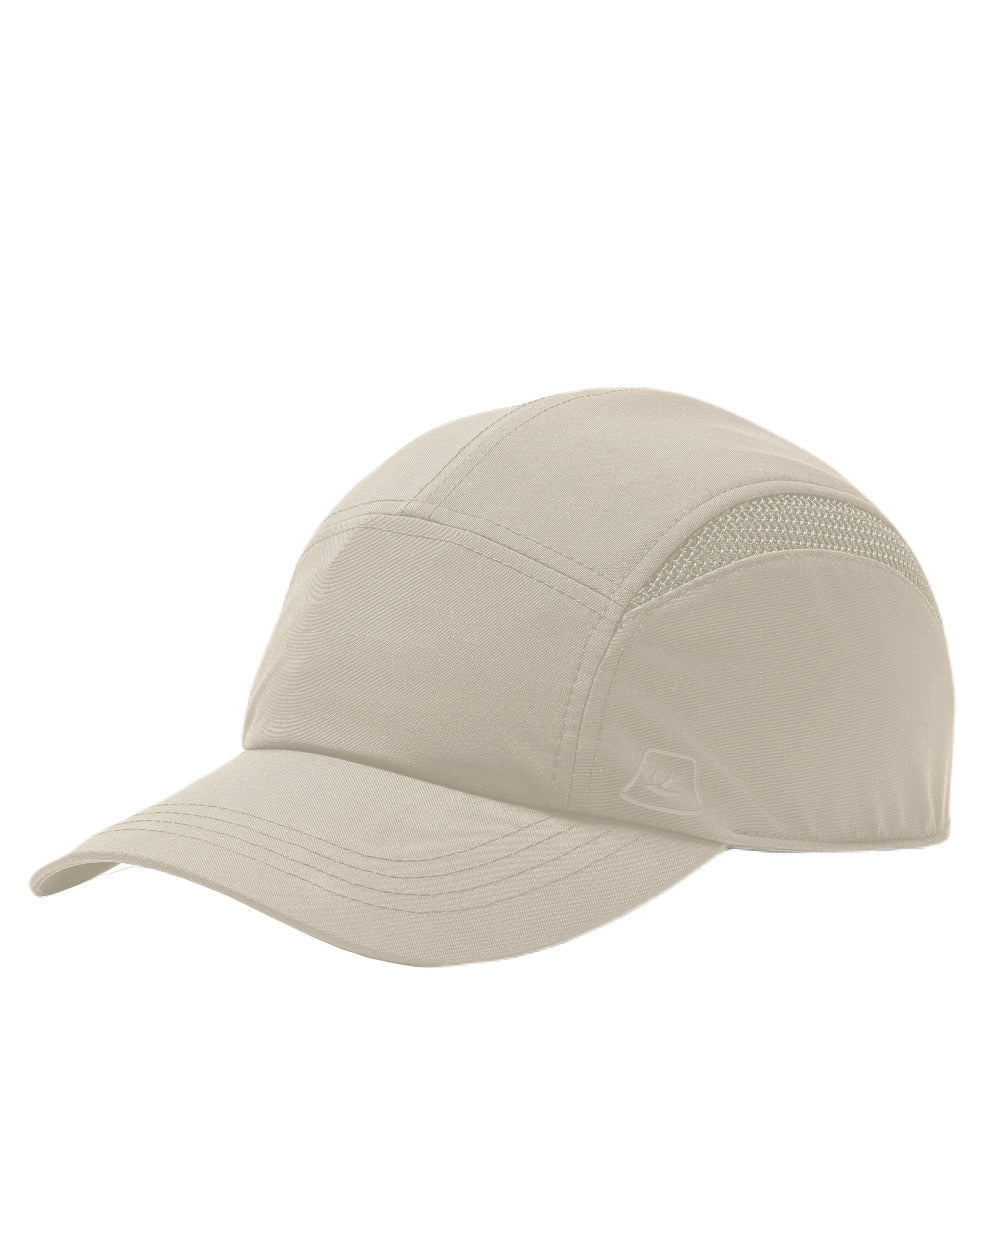 Light Stone Coloured Tilley Hat Airflo Cap On A White Background 